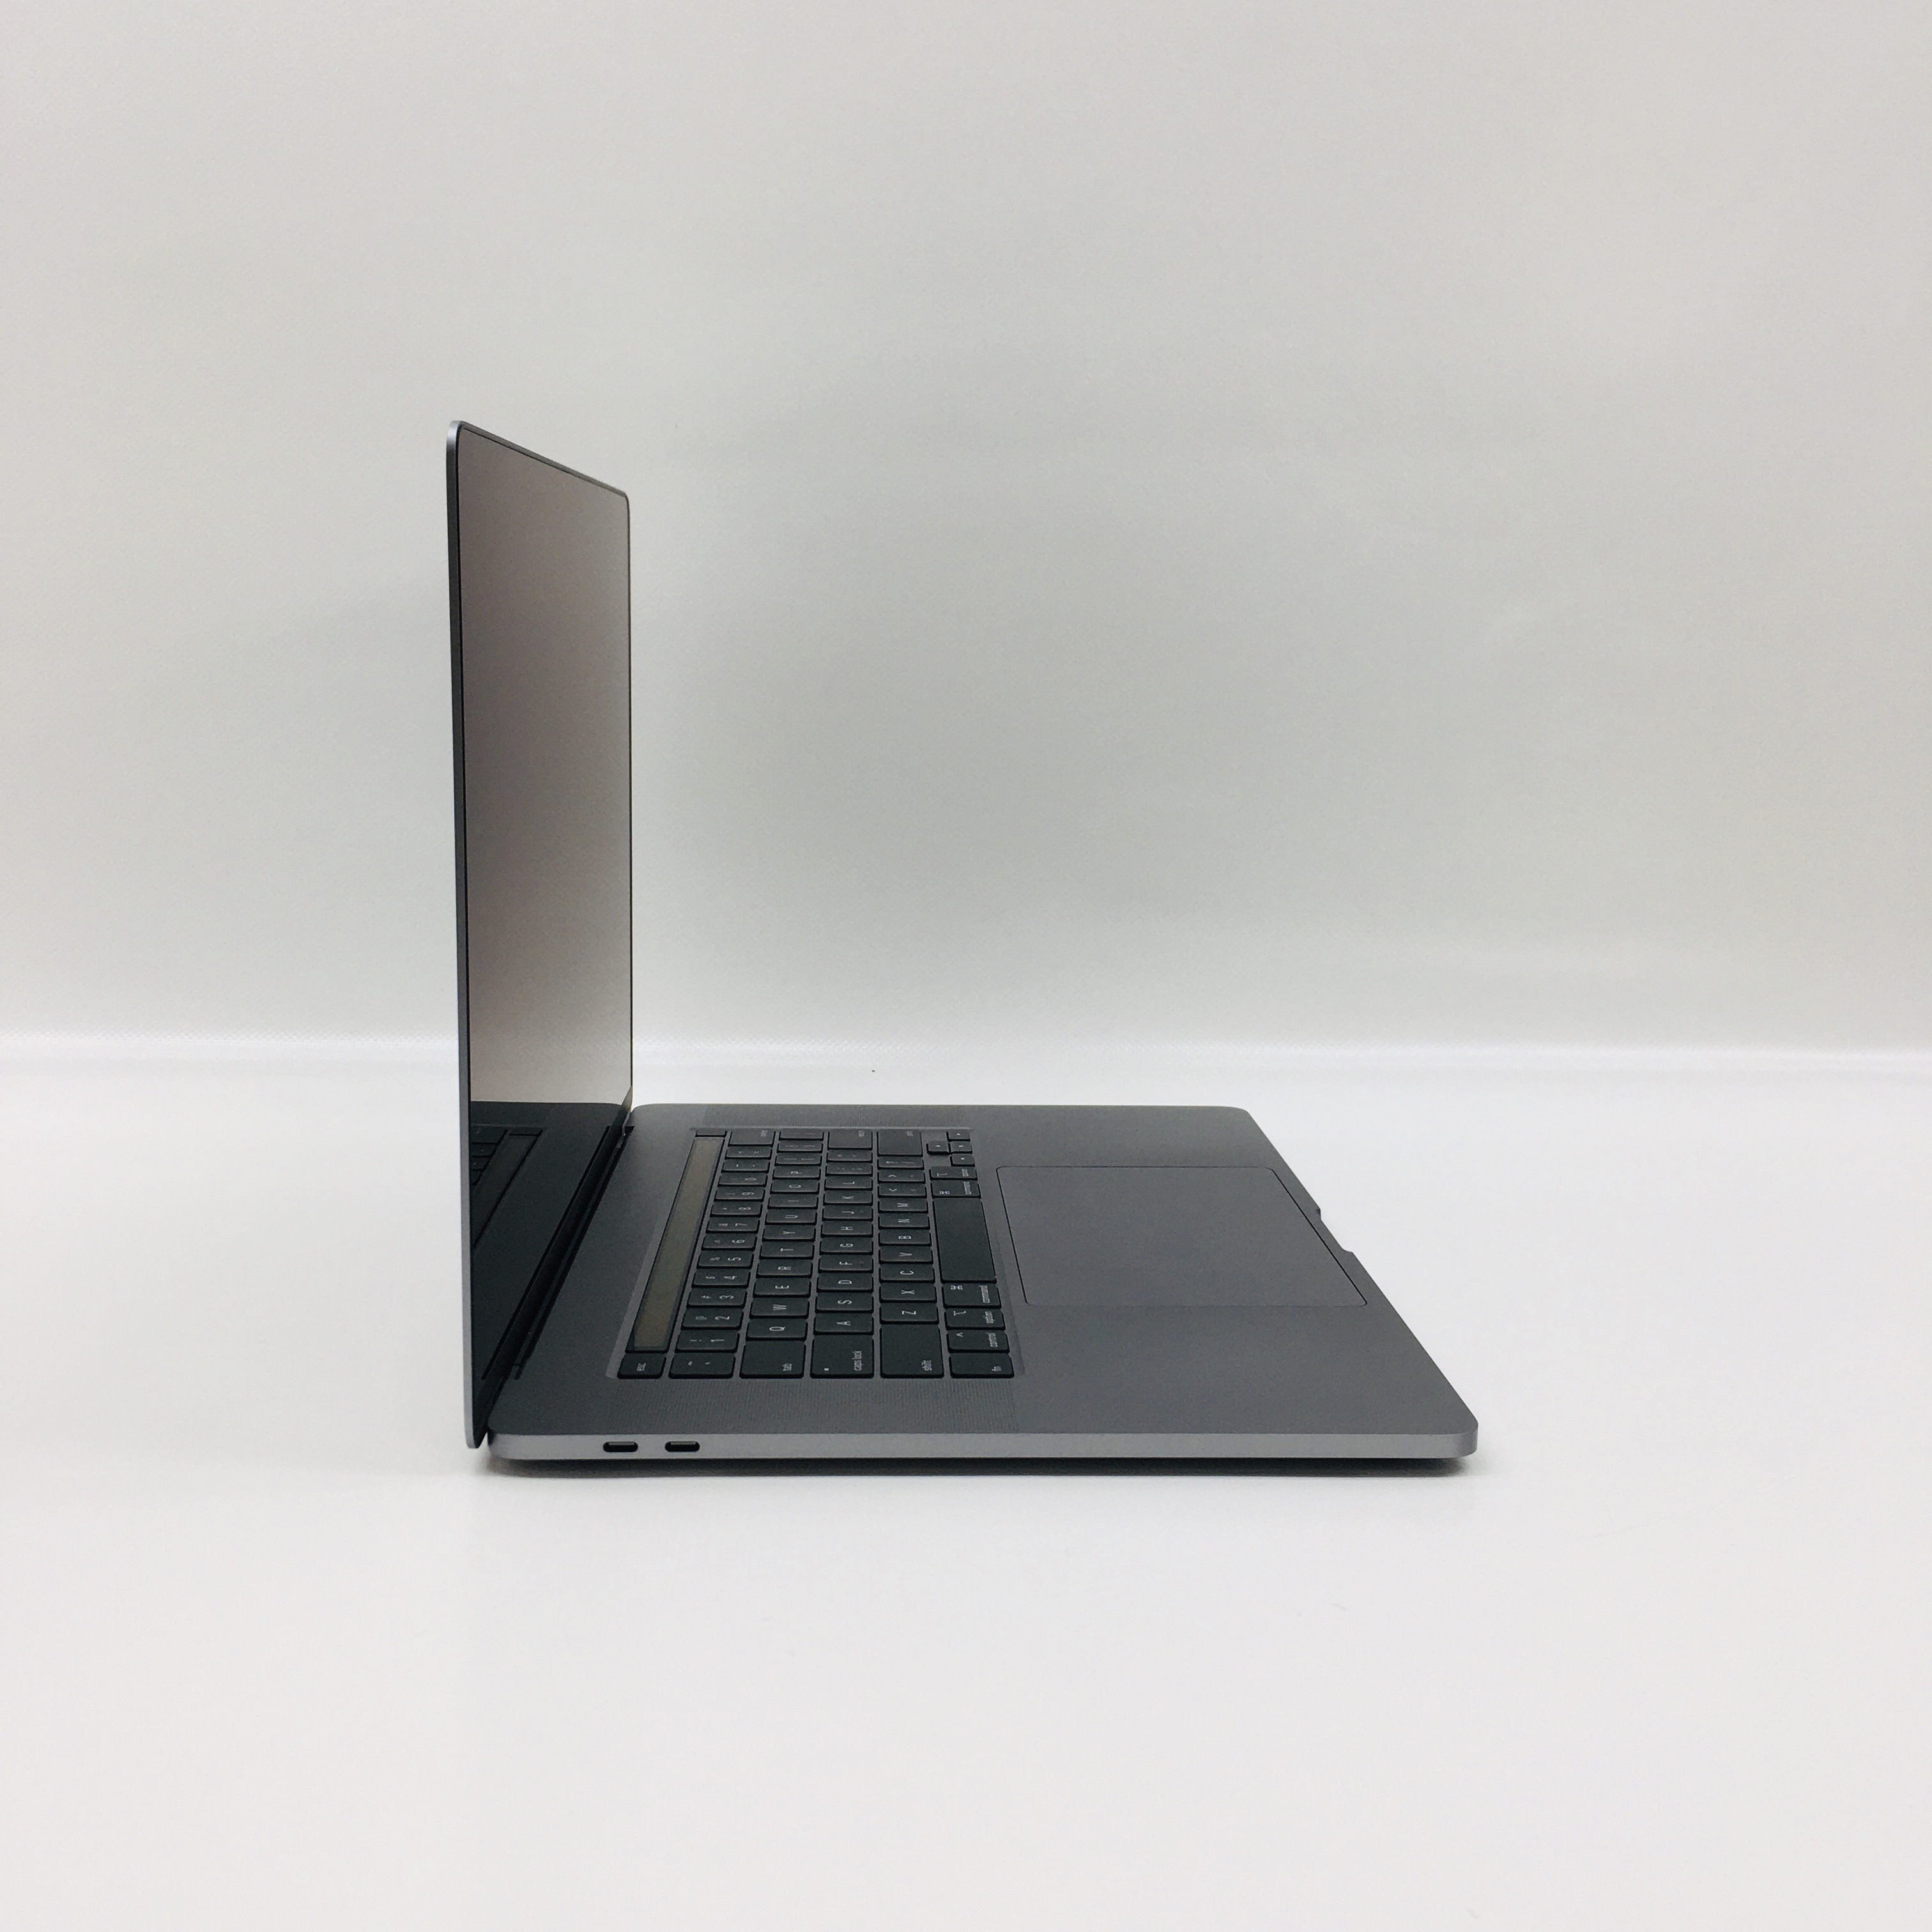 MacBook Pro 16" Touch Bar Late 2019 (Intel 6-Core i7 2.6 GHz 16 GB RAM 512 GB SSD), Space Gray, Intel 6-Core i7 2.6 GHz, 16 GB RAM, 512 GB SSD, image 2